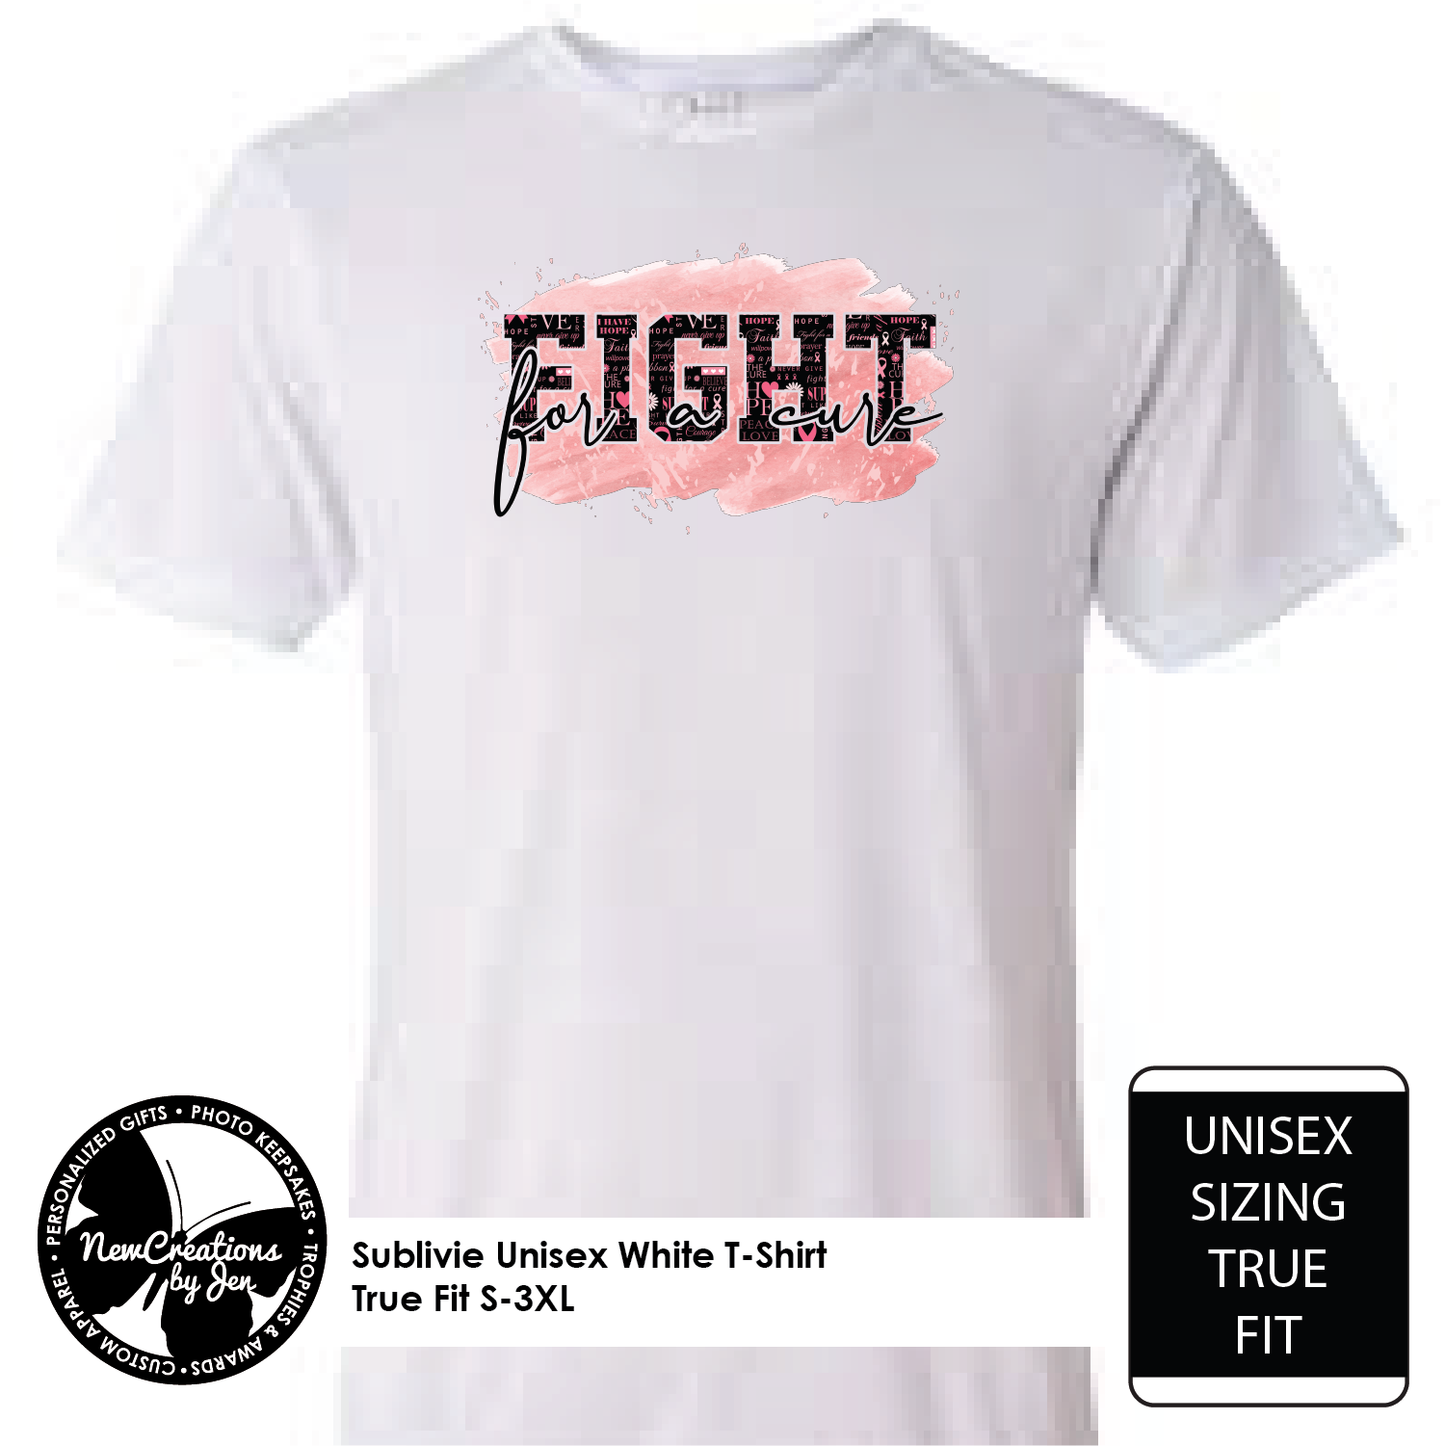 Fight for a Cure